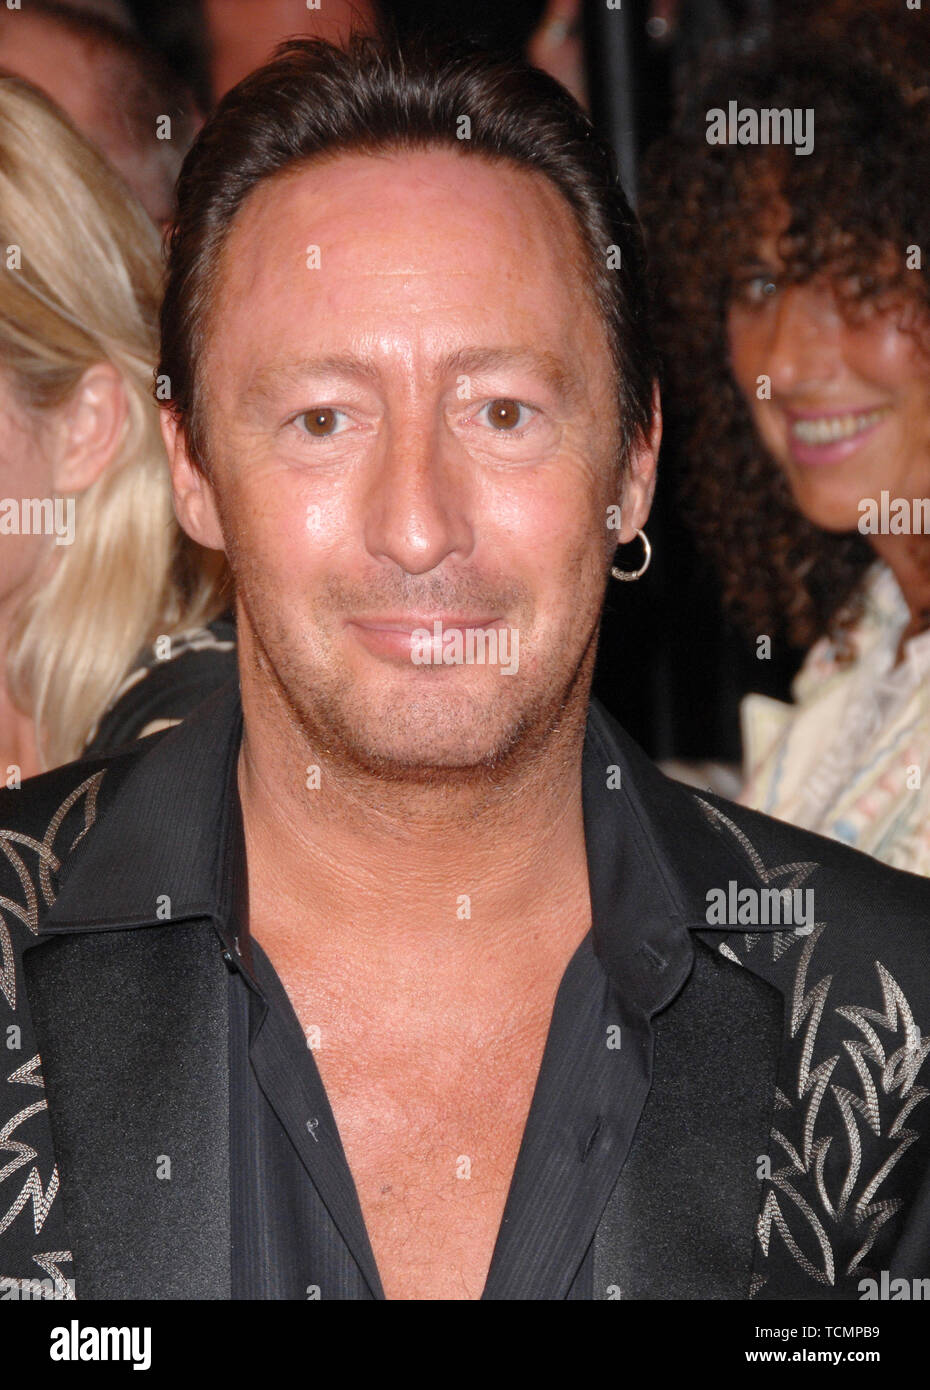 CANNES, FRANCE. May 19, 2007: Julian Lennon at the screening of 